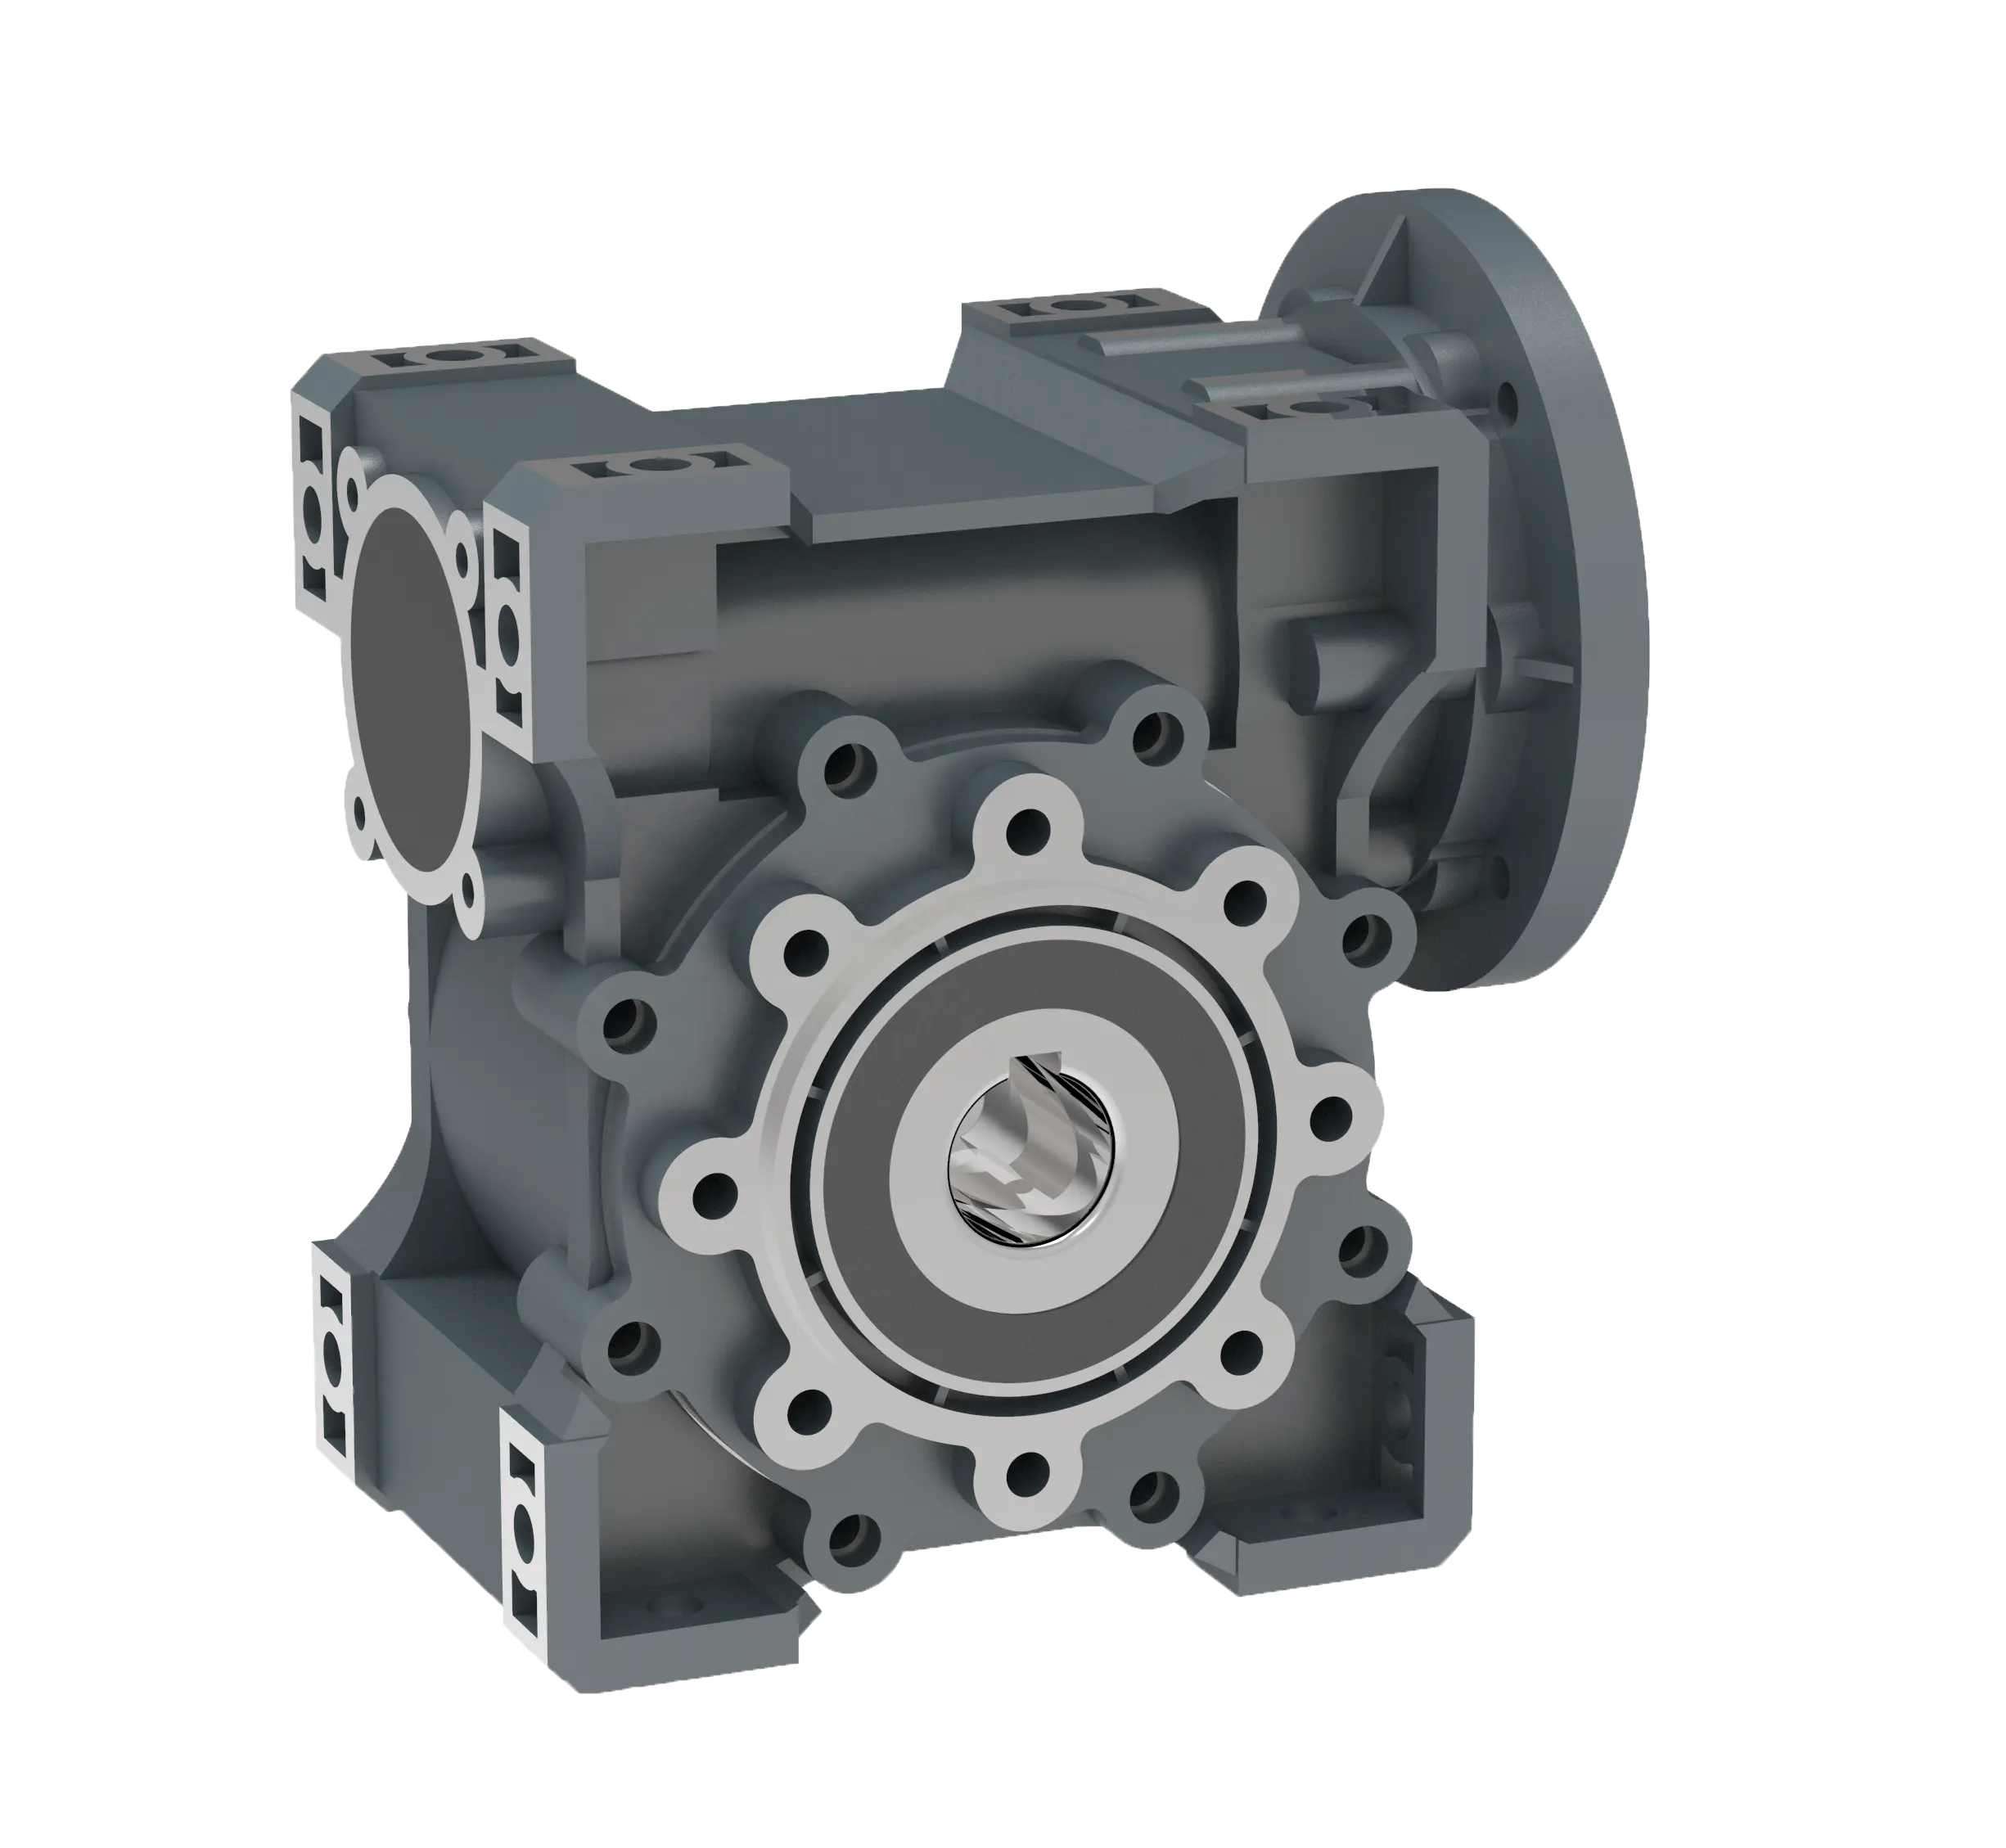 worm gear motor NMRV063 1:10 strong self-locking worm gear box apply on mining industry looking for agent in Russia